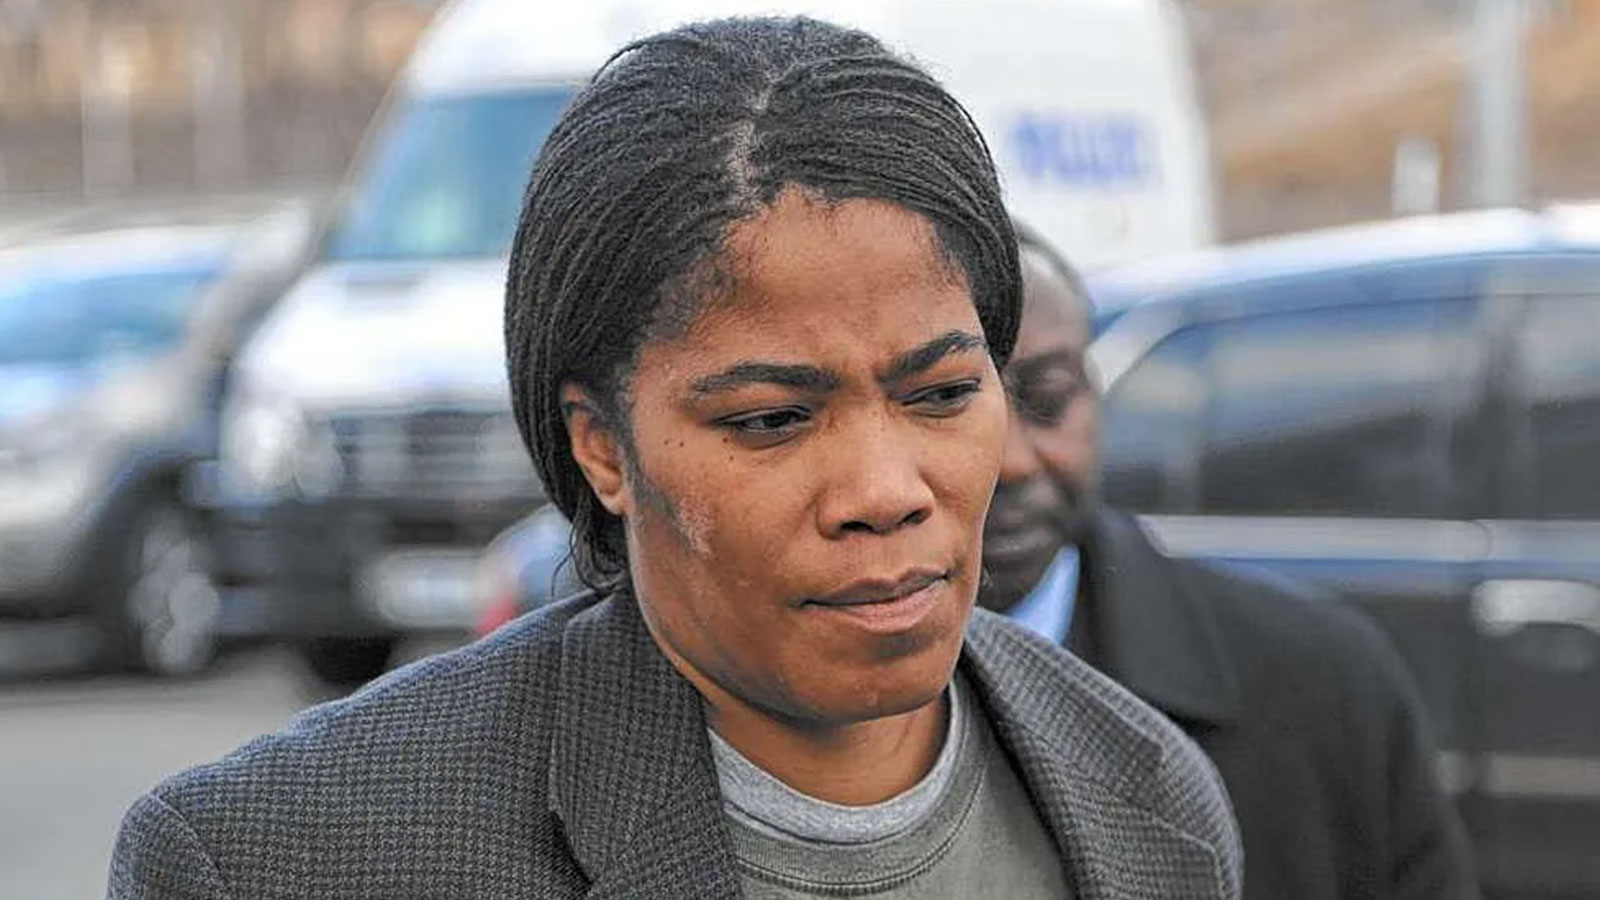 Malcolm X’s daughter Malikah Shabazz found dead in NYC apartment just days after 2 men exonerated for his murder